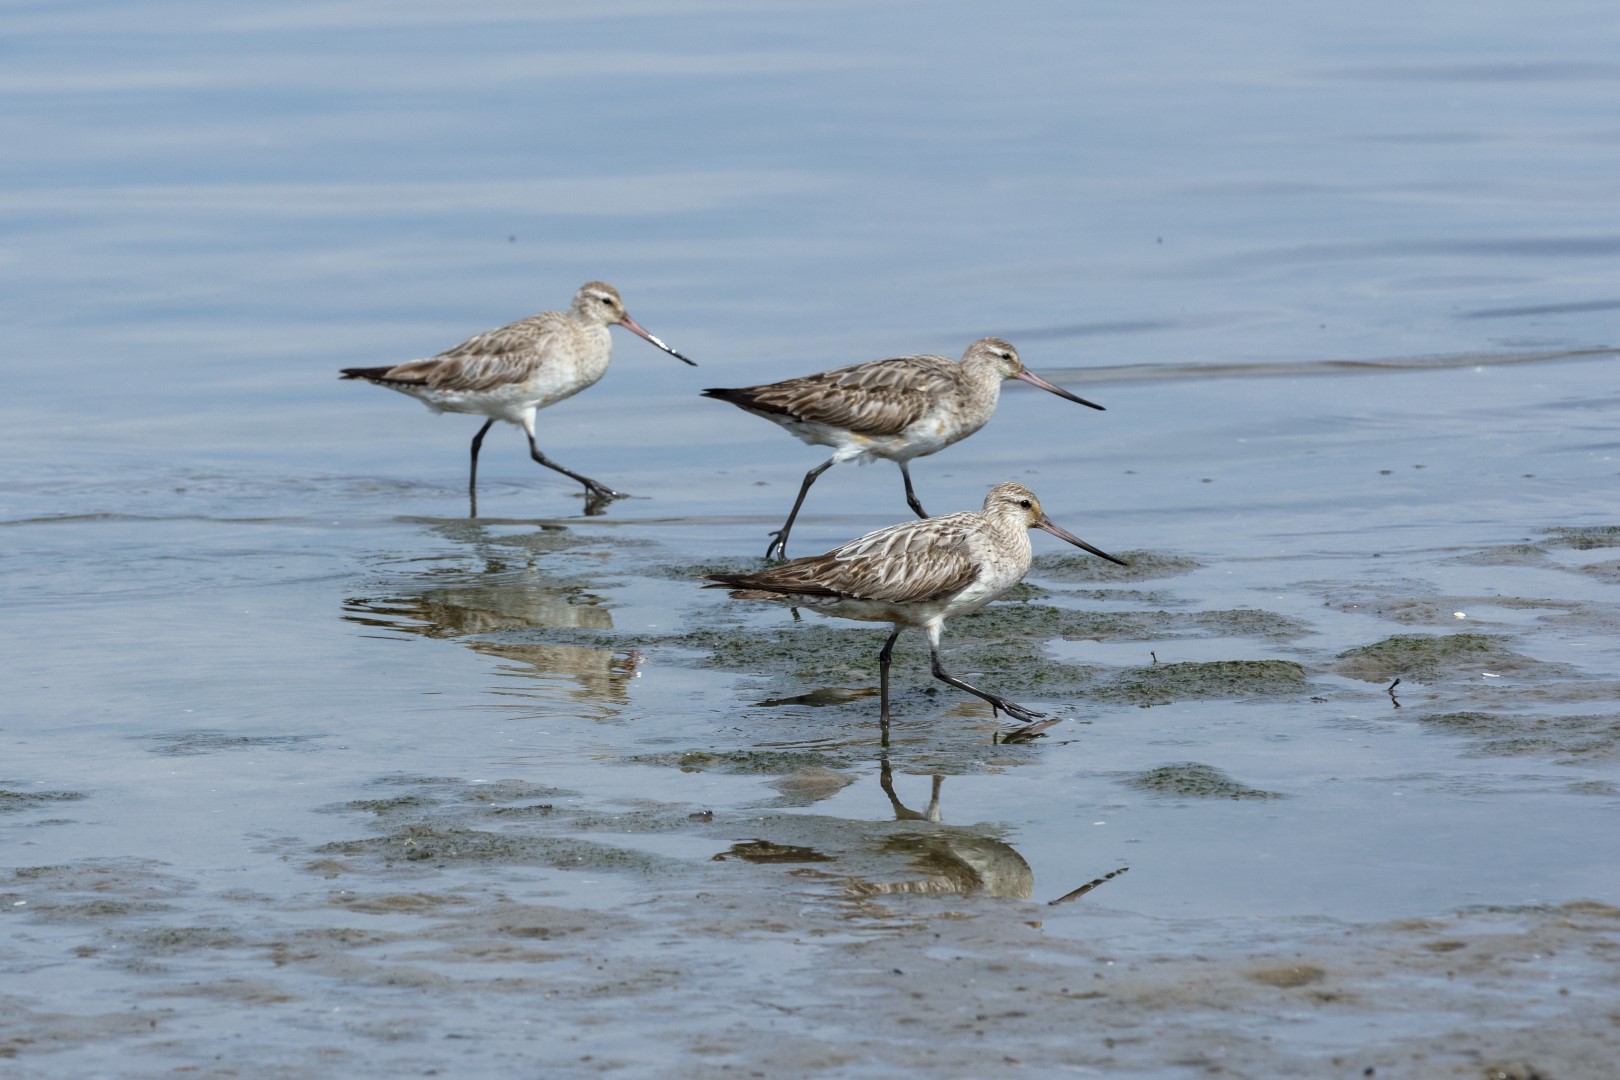 image showing Bar-tailed Godwit birds in water